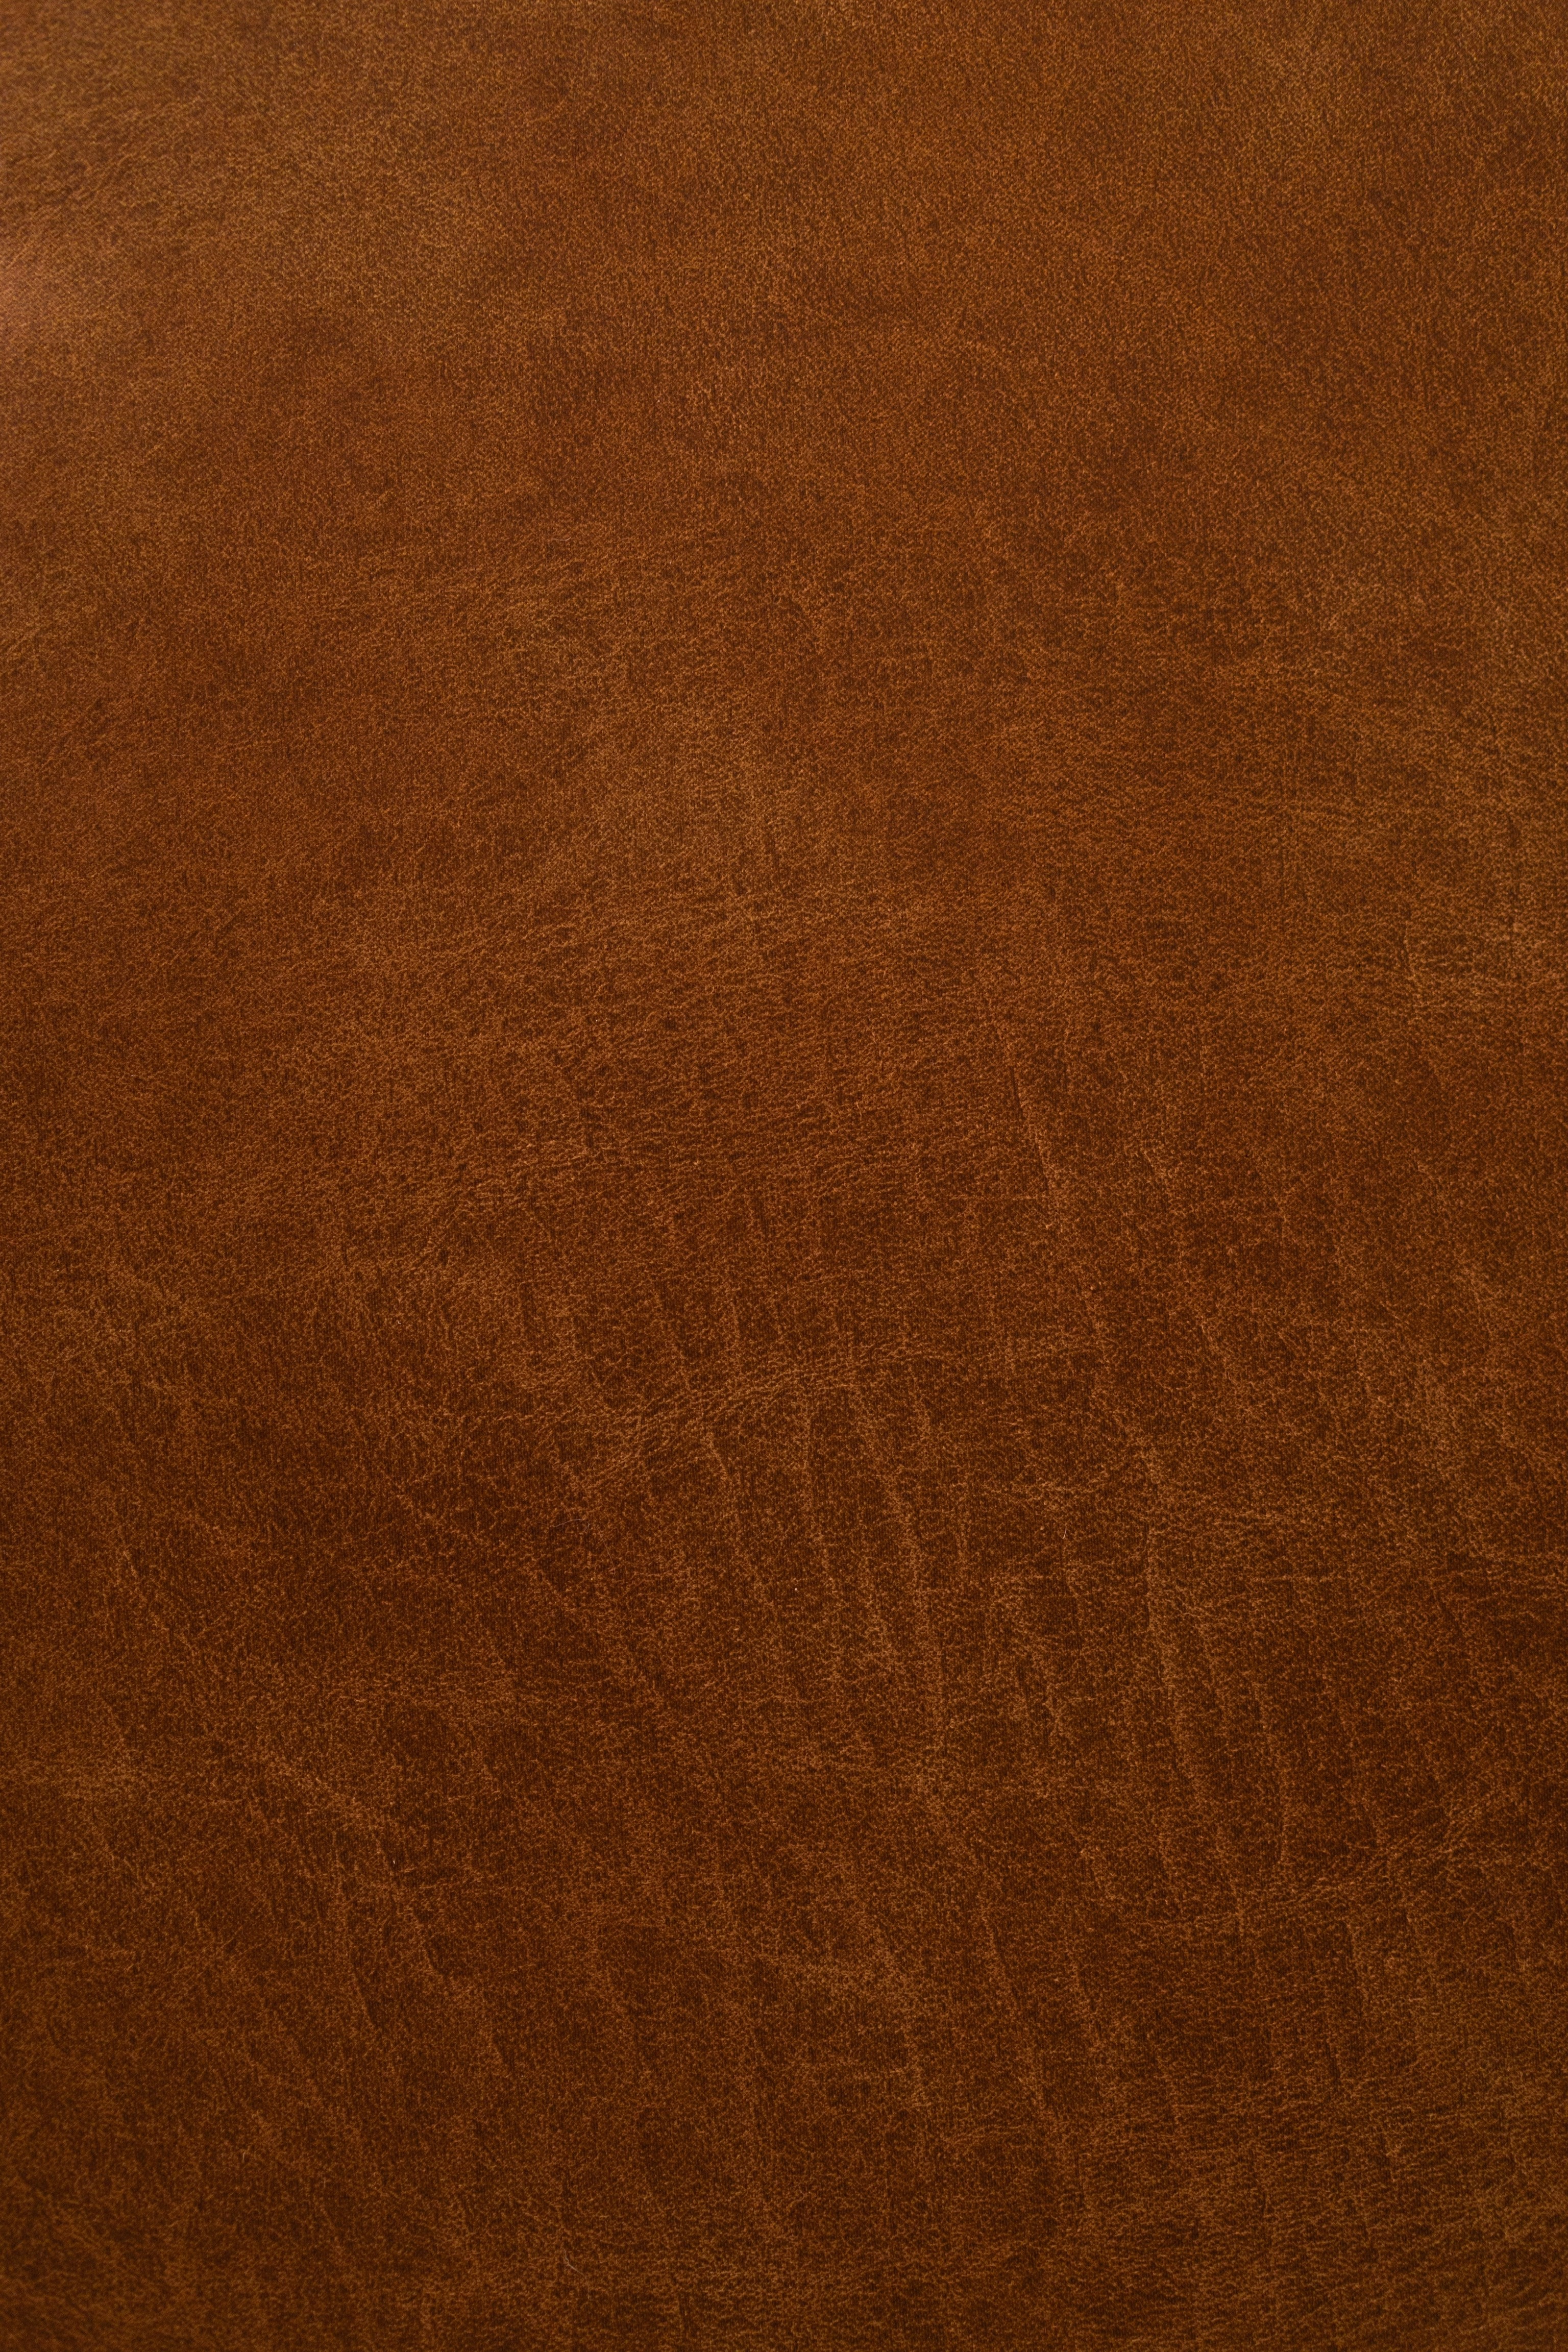 surface, texture, textures, brown, leather, skin cellphone